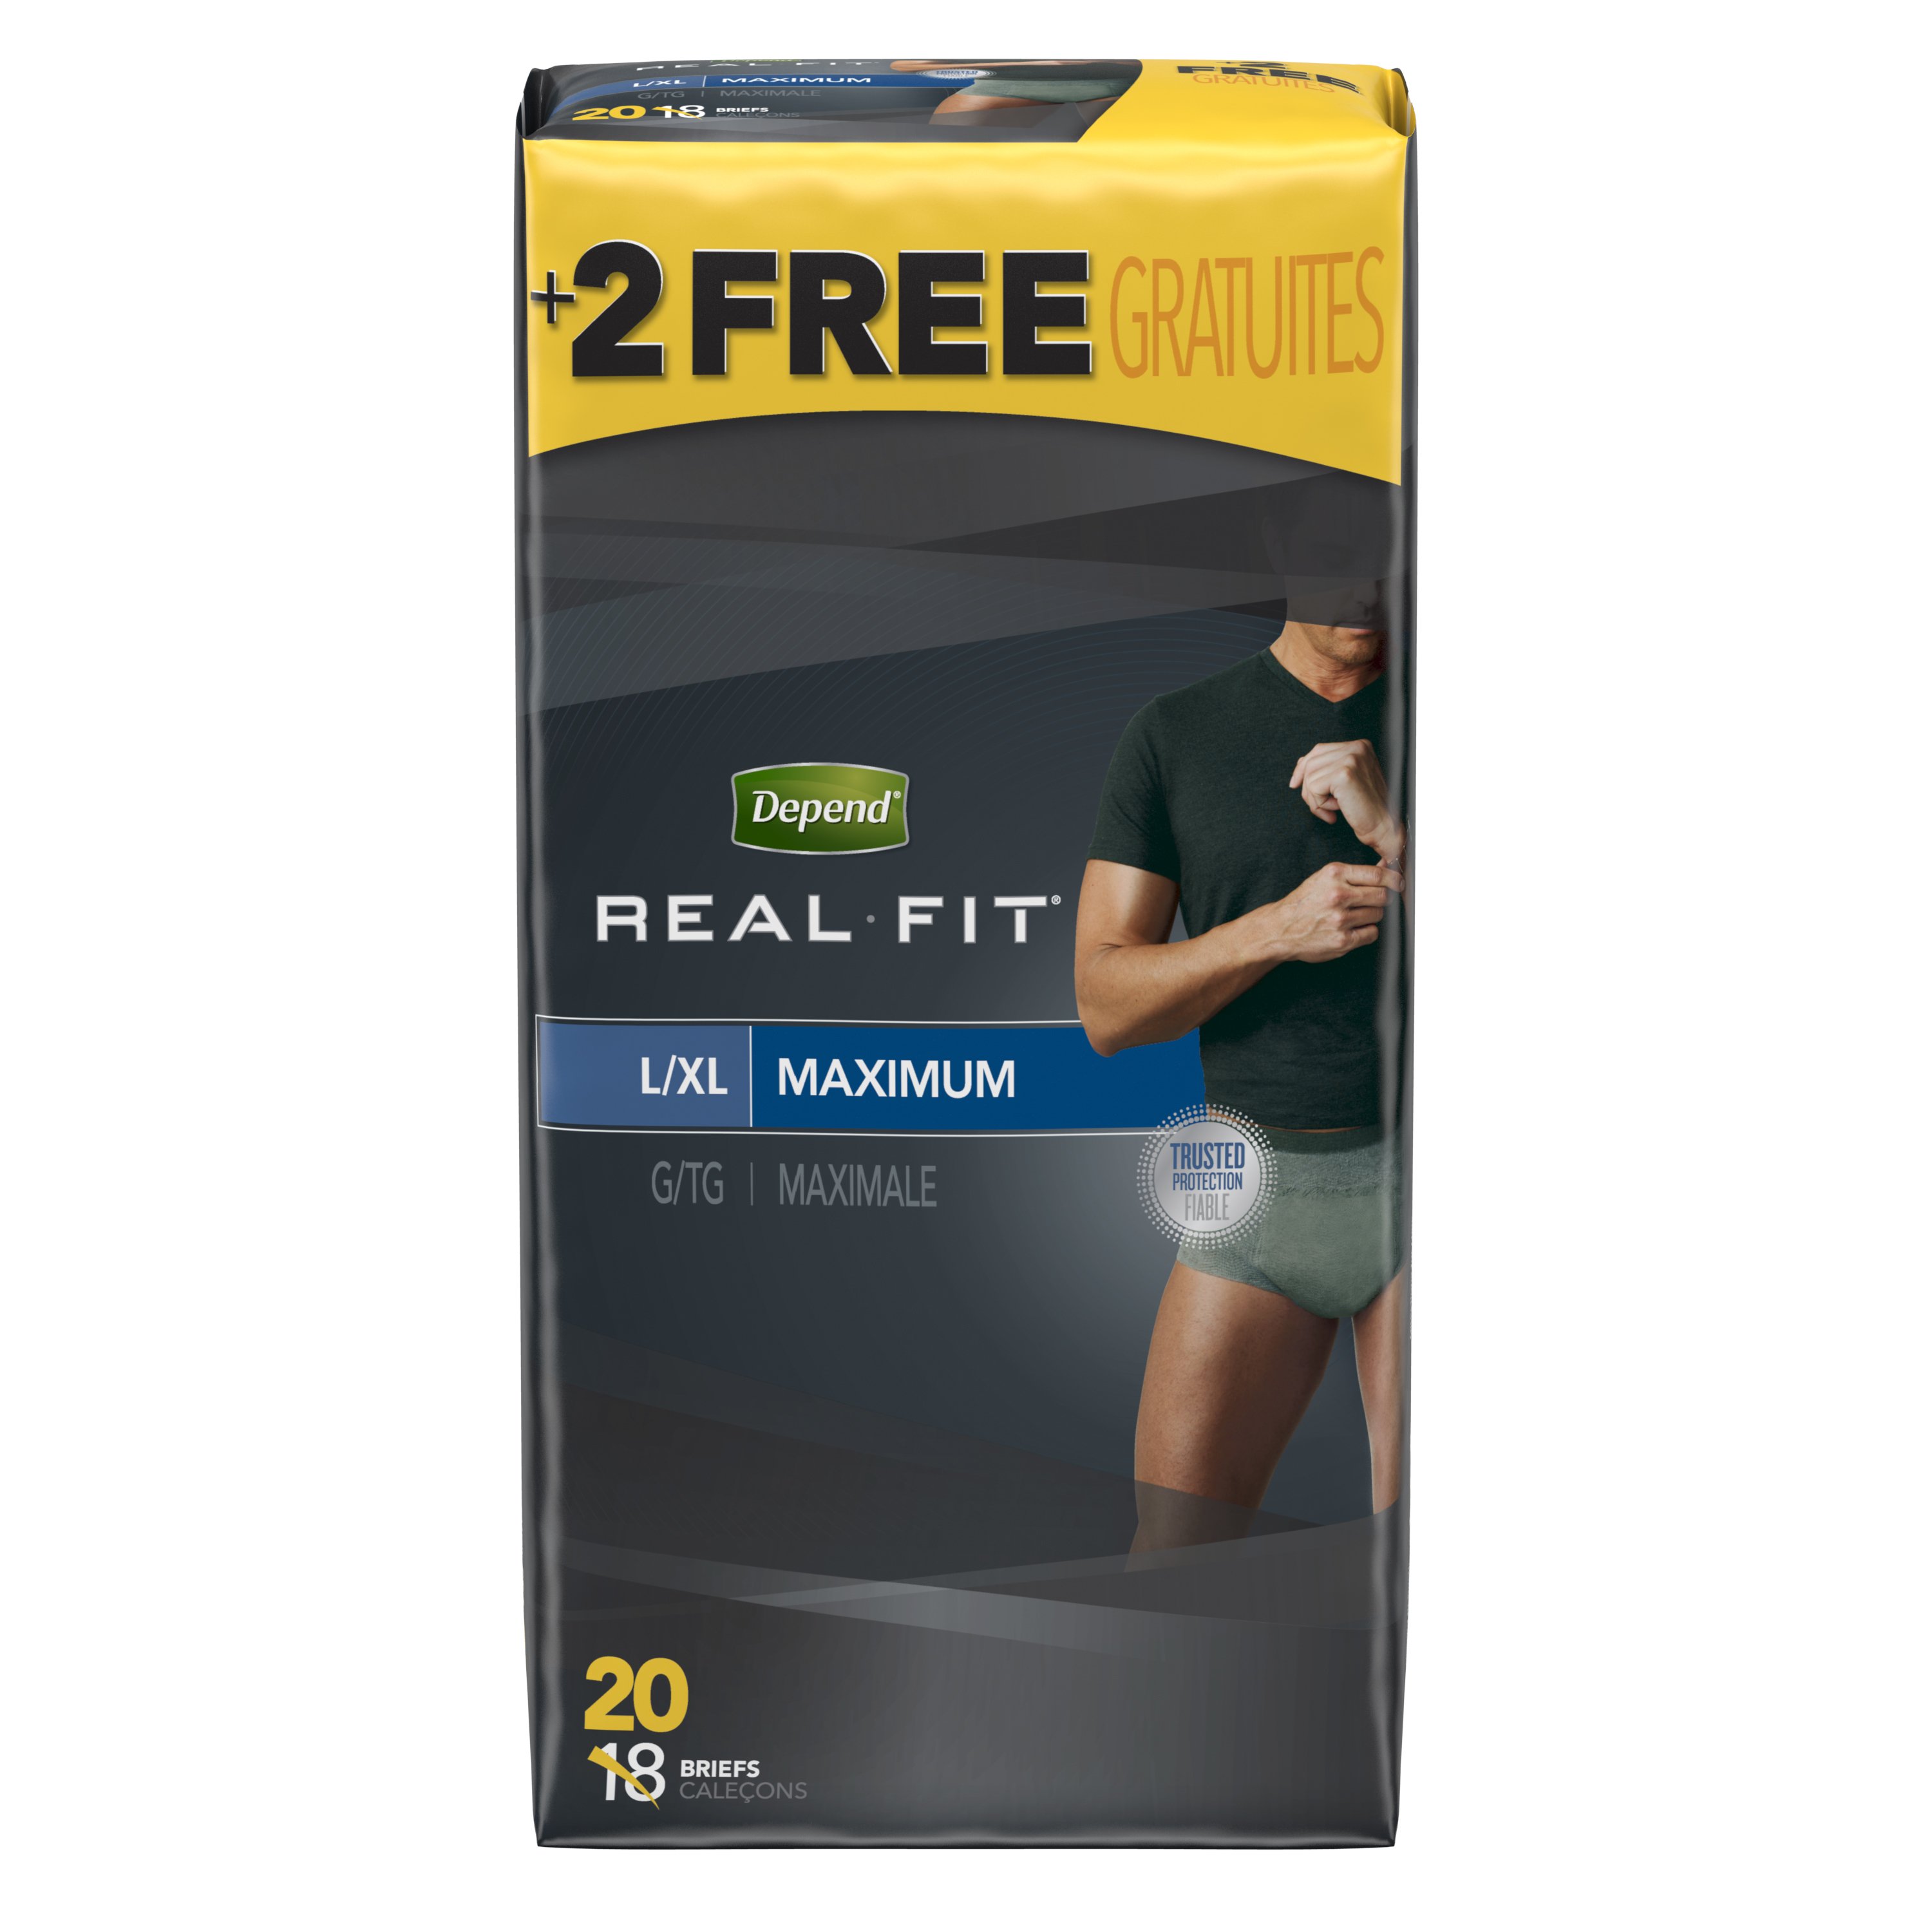 Prevail Per-Fit Daily Underwear, Adult, Male, Pull-on with Tear